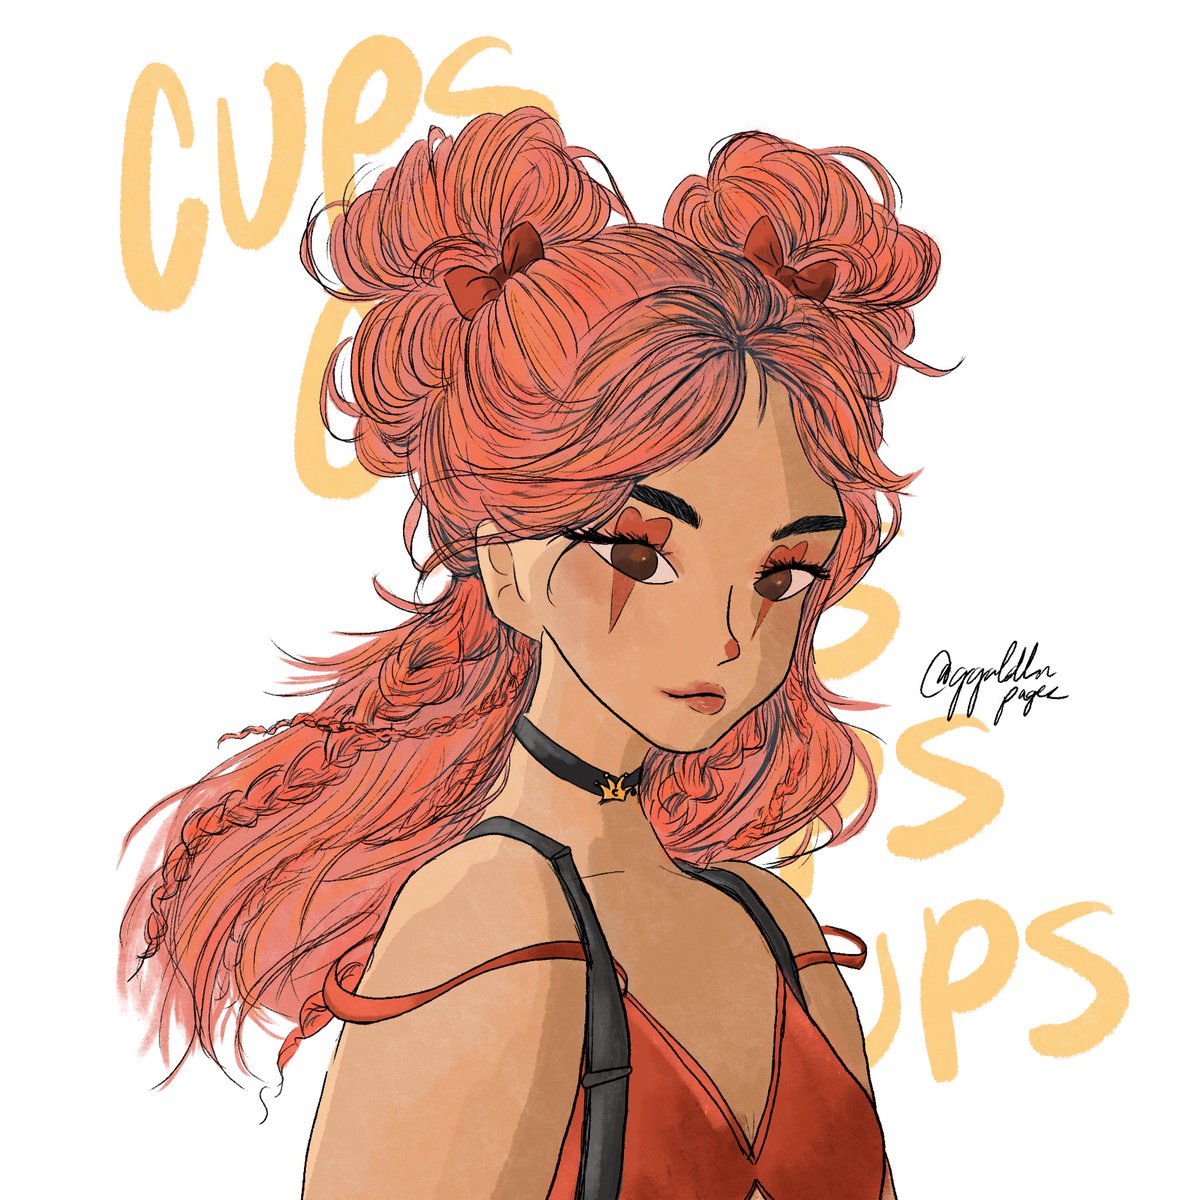 hicCUPS @Valkyrae #Hiccups #RayMond 

My first Hiccups work🥰 She totally steals Chatty’s bow ties for her hair 😝